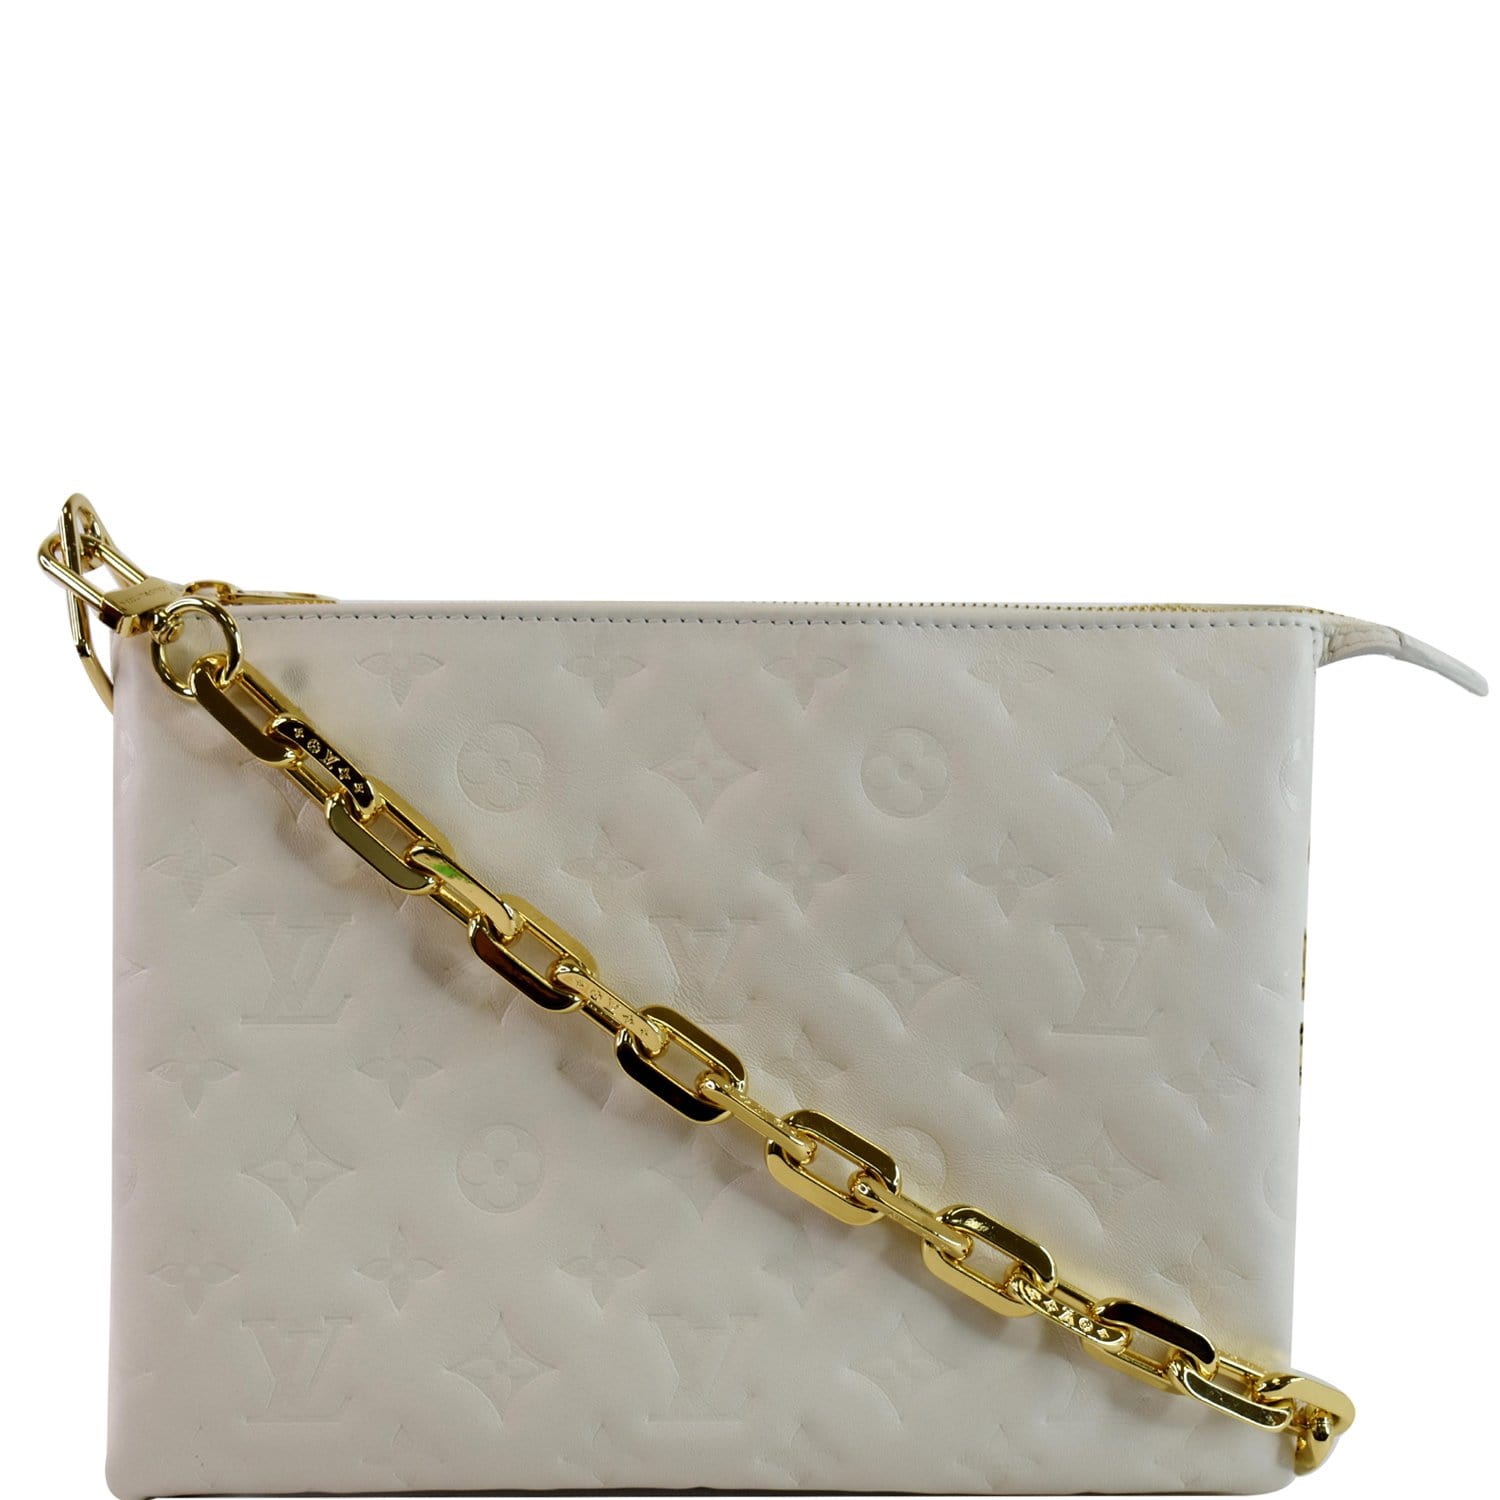 Louis Vuitton Pochette Coussin In Beige Monogram Embossed Leather! Limited!  New!